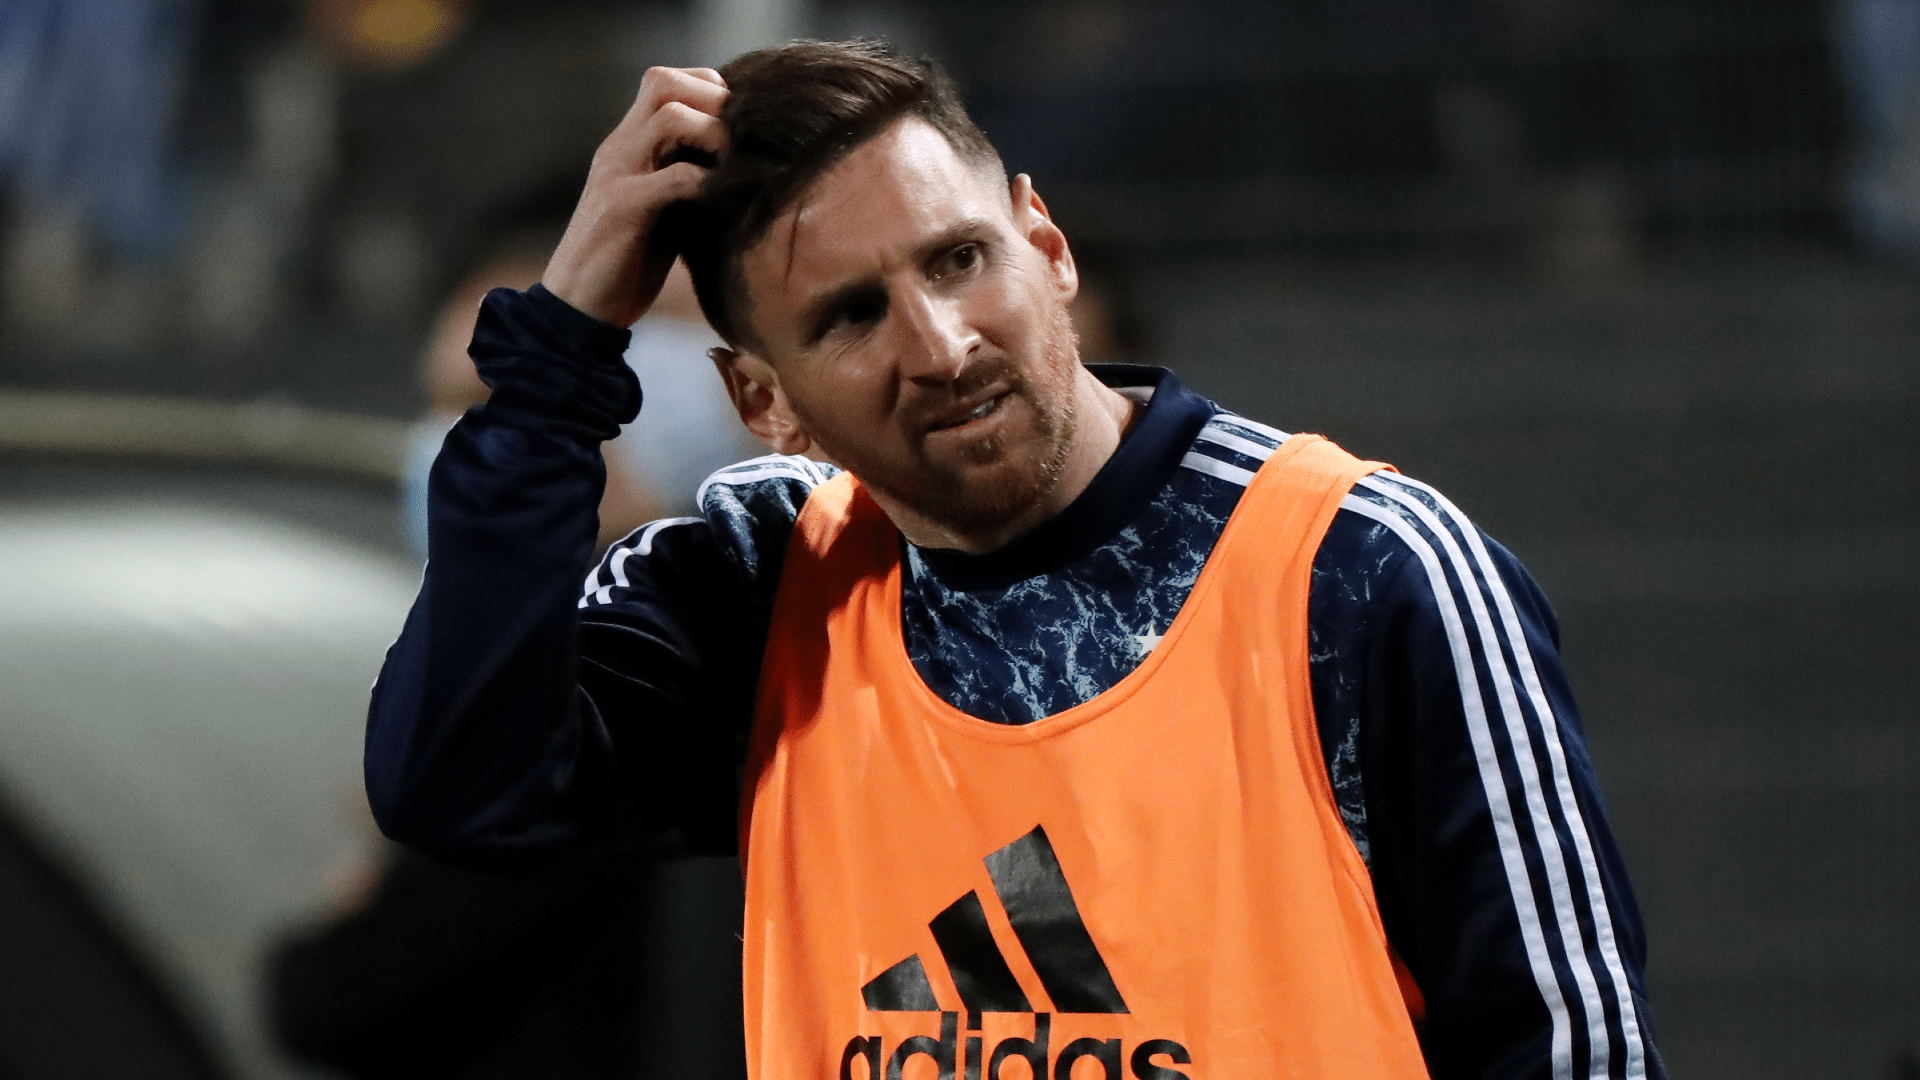 COVID-19 recovery 'took me longer than I thought' : Messi